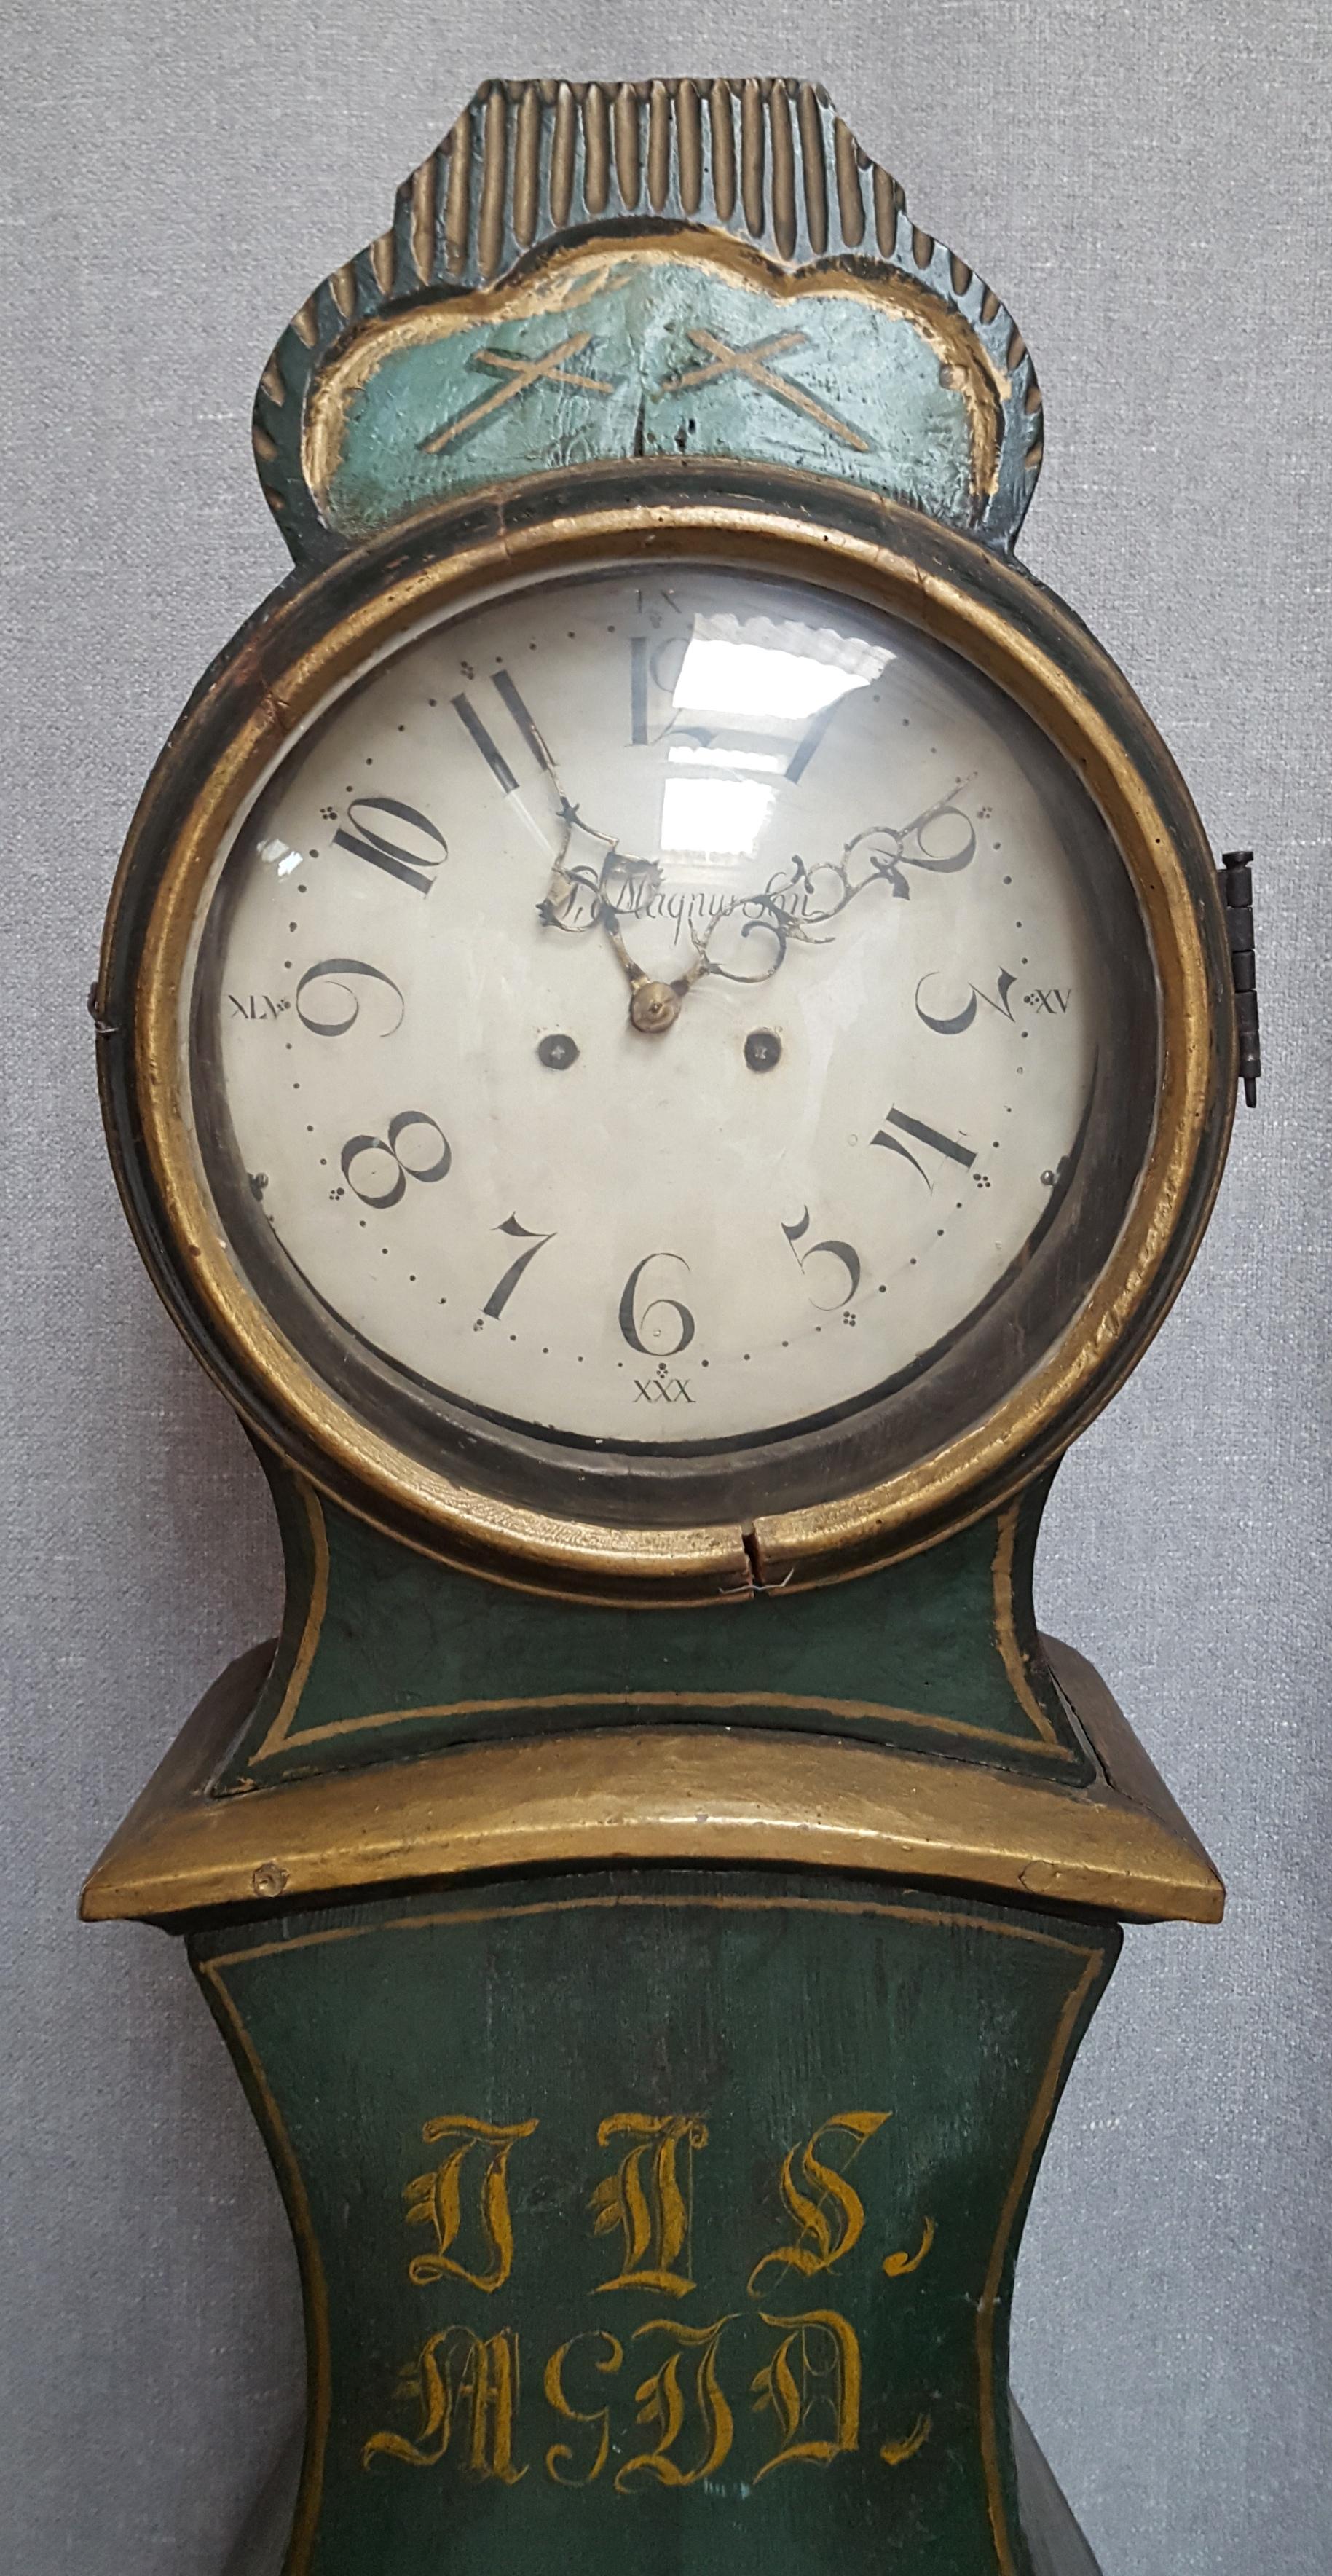 Super rare antique Swedish Fyksdall Mora clock from early 1800s in probable original paint with a great fryksdall style shape body and a good face with lots of detail and nicely detailed hood in great condition. 

It has the Classic extended belly